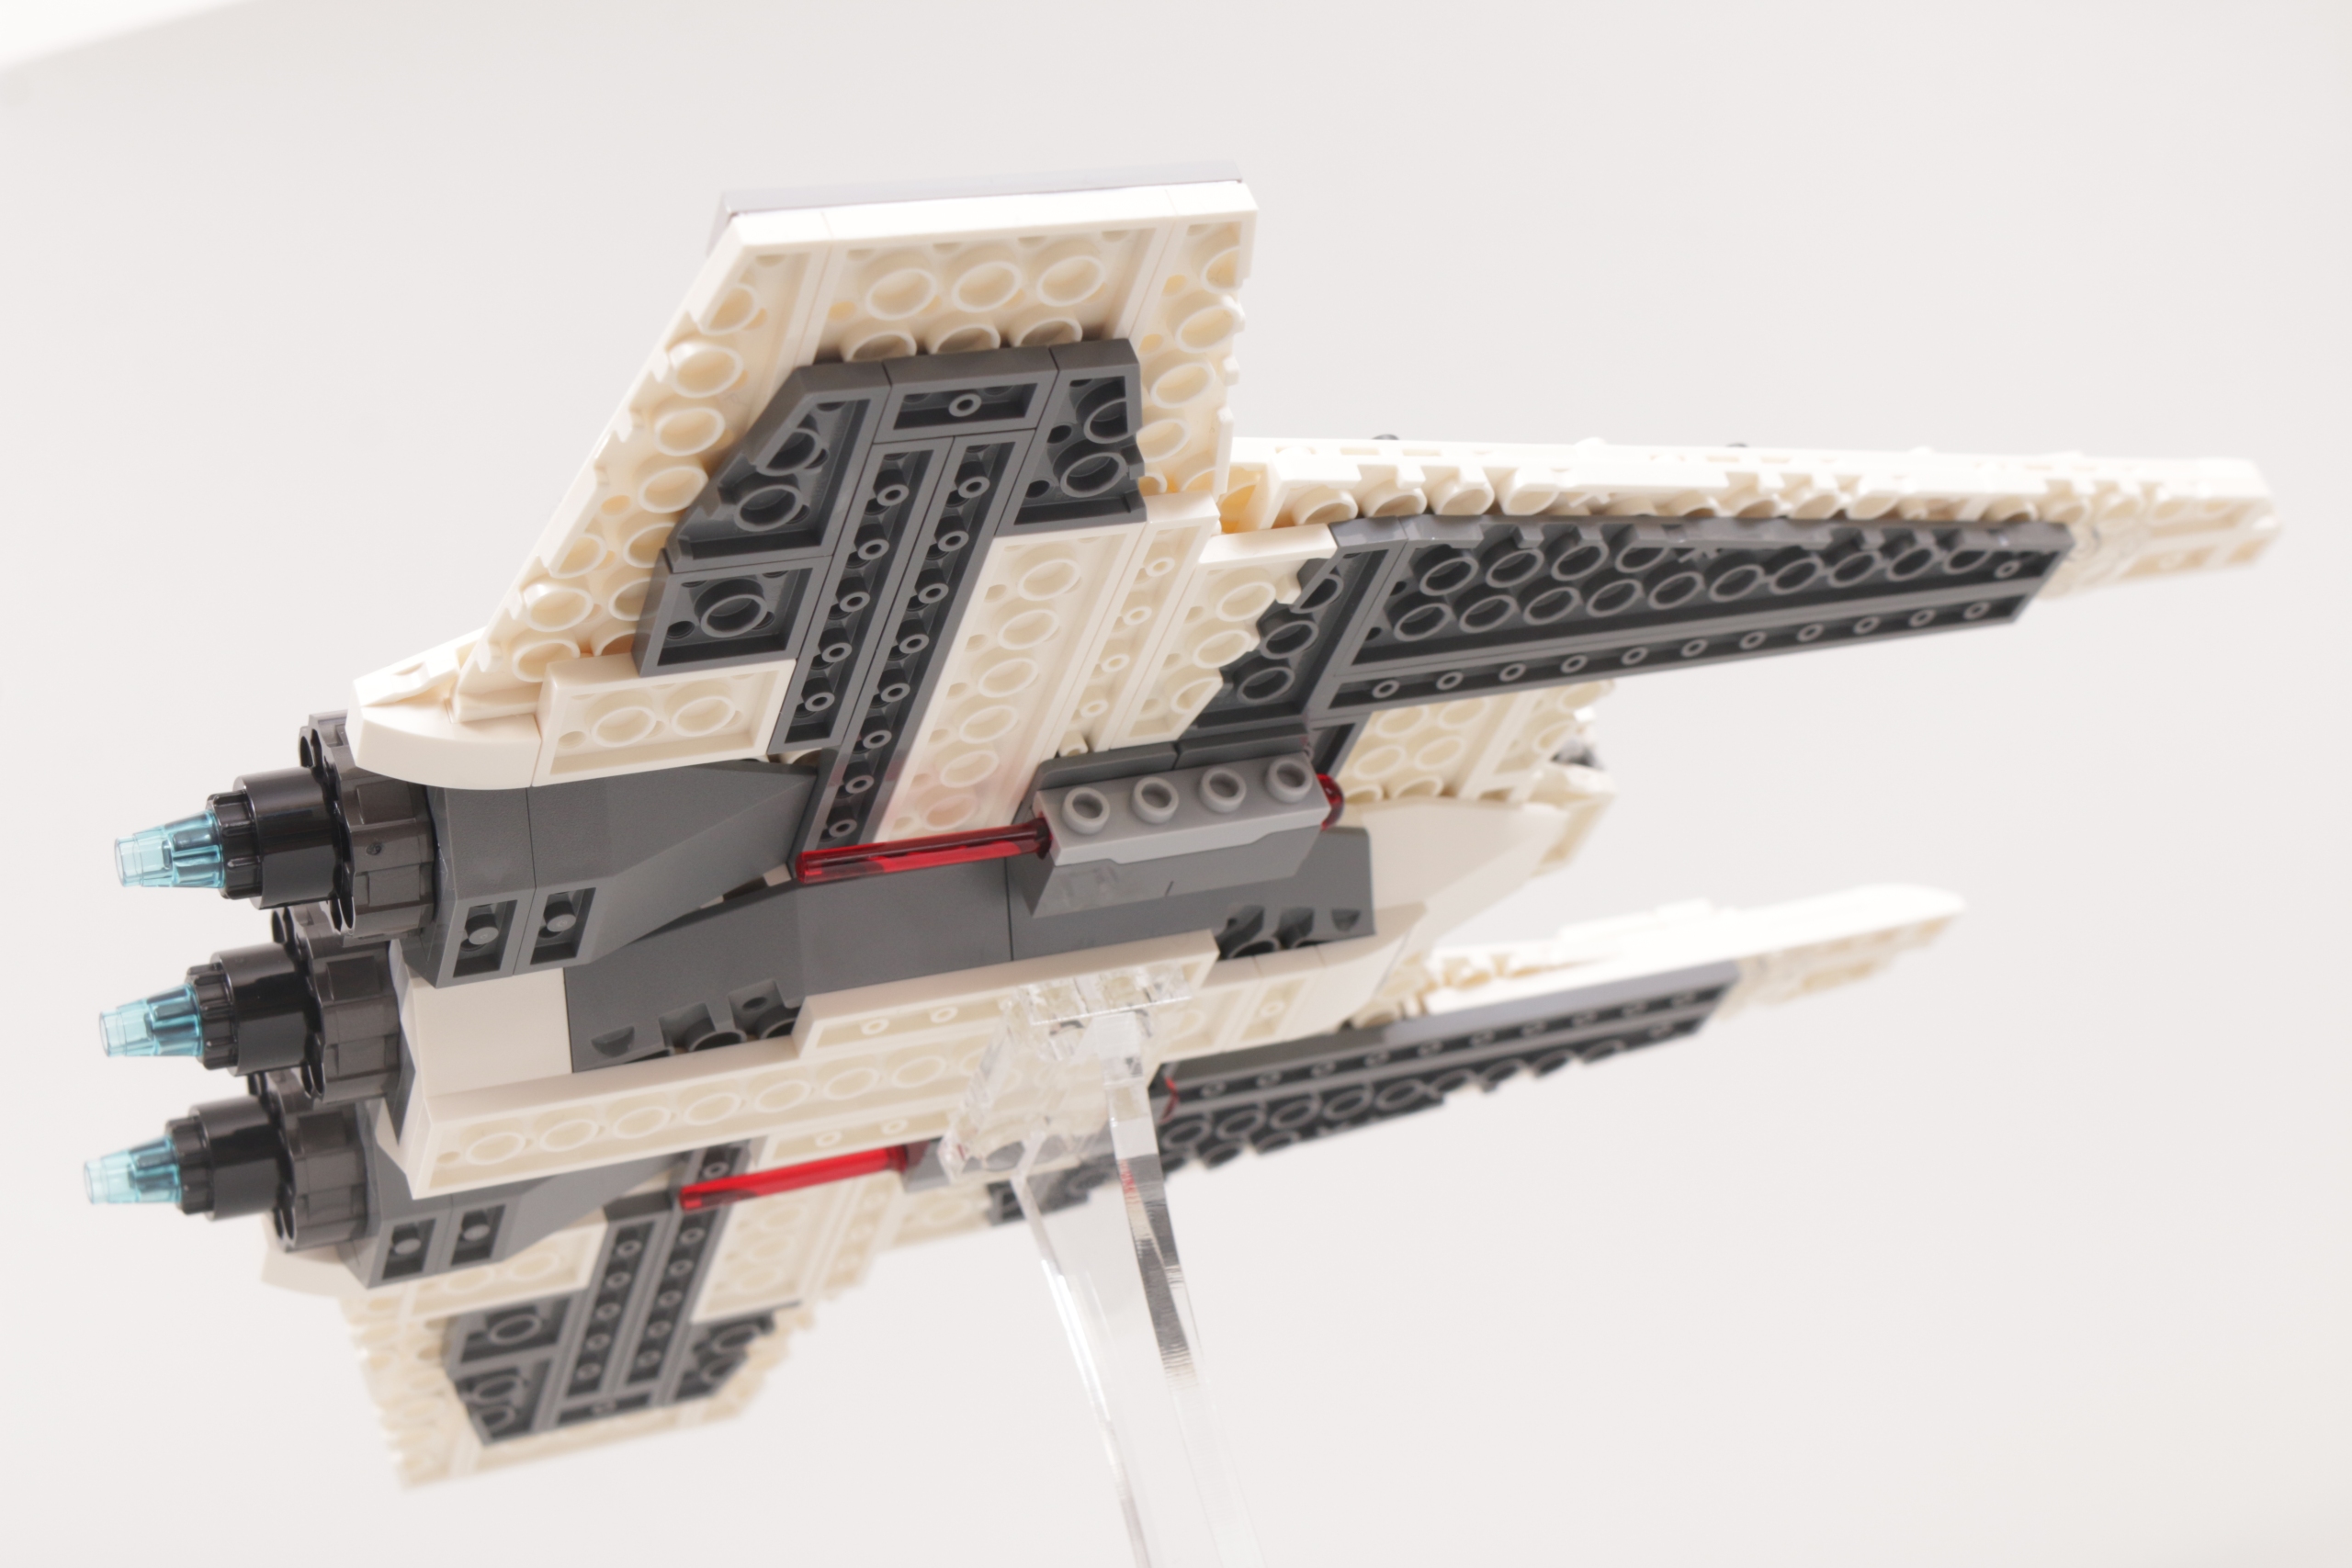 LEGO Star Wars 75348 Mandalorian Fang Fighter vs. TIE Interceptor review 26 scaled